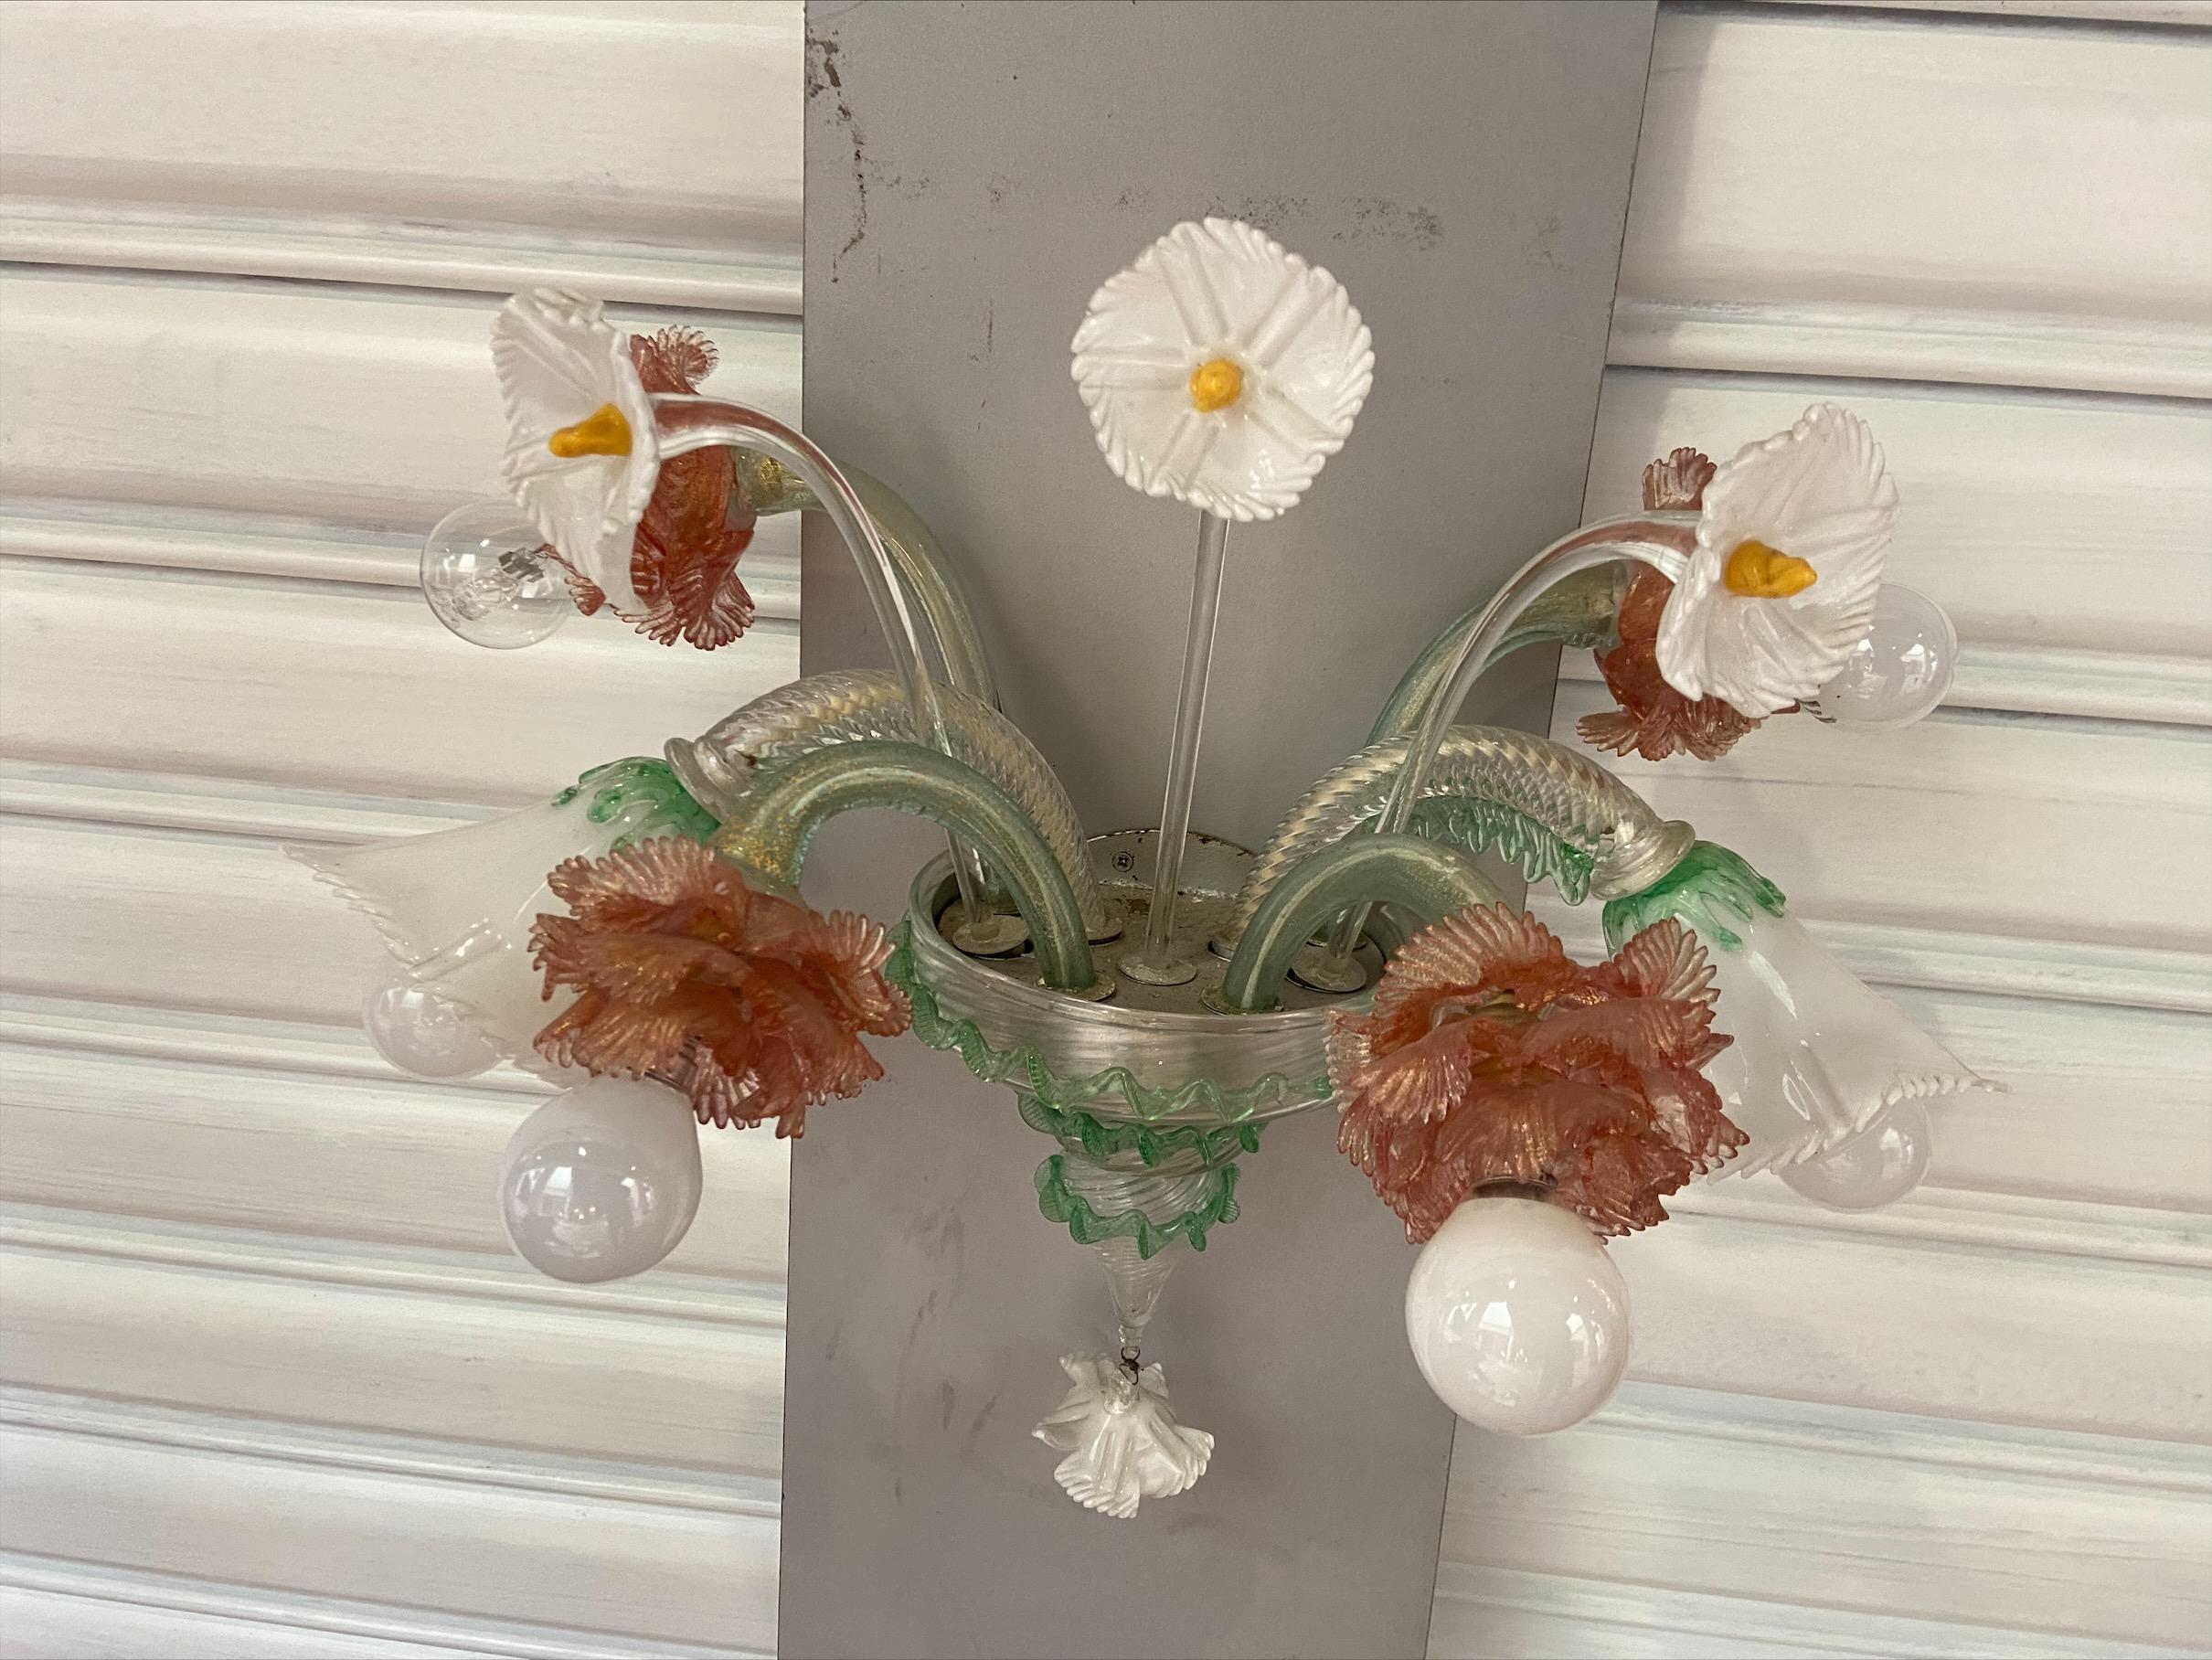 Flower wall lamp - Circa 1960
Murano glass and steel
In the Venetian style

Measures: W 48 x D 25 x H 41cm.